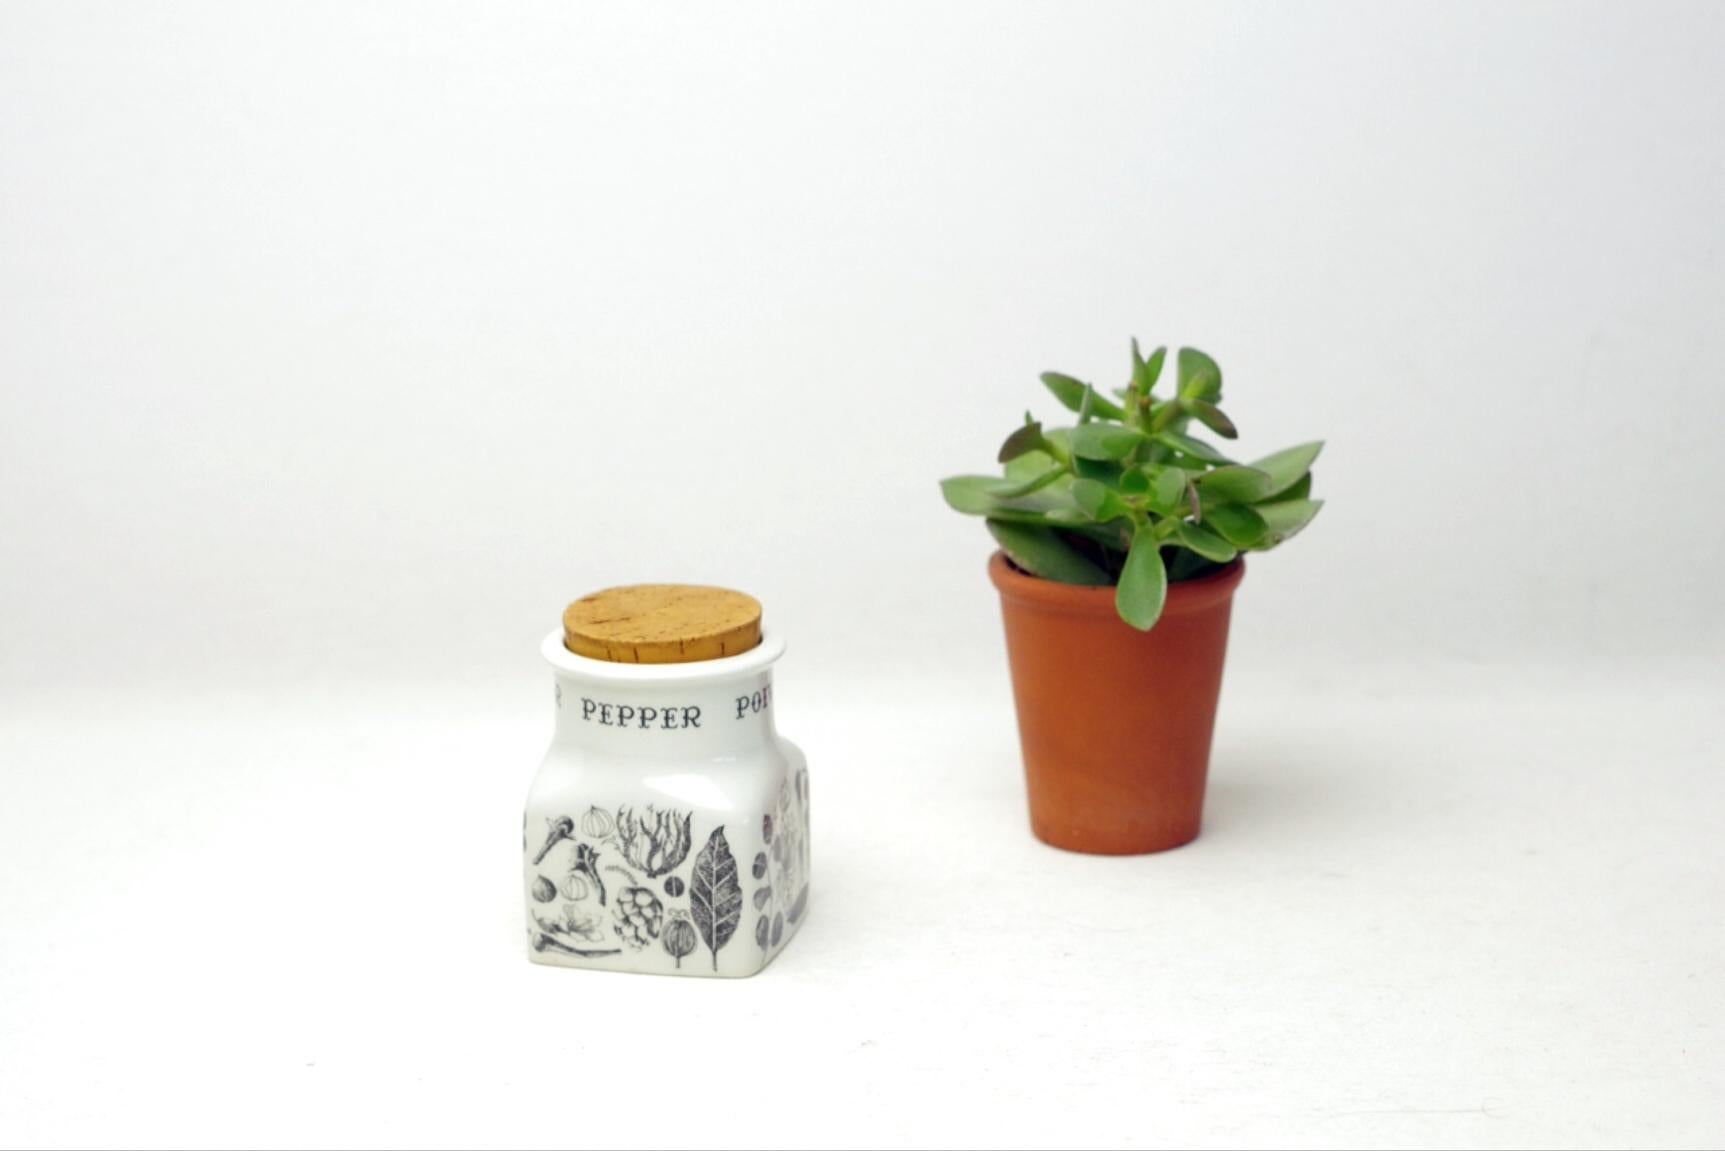 Product description:
We have on offer this pepper spice pot. At first glance, I was fascinated by the cuteness of these spice pots of this serie, but when I looked closely the design appeared to be very delicate as well. Lining up all the spice